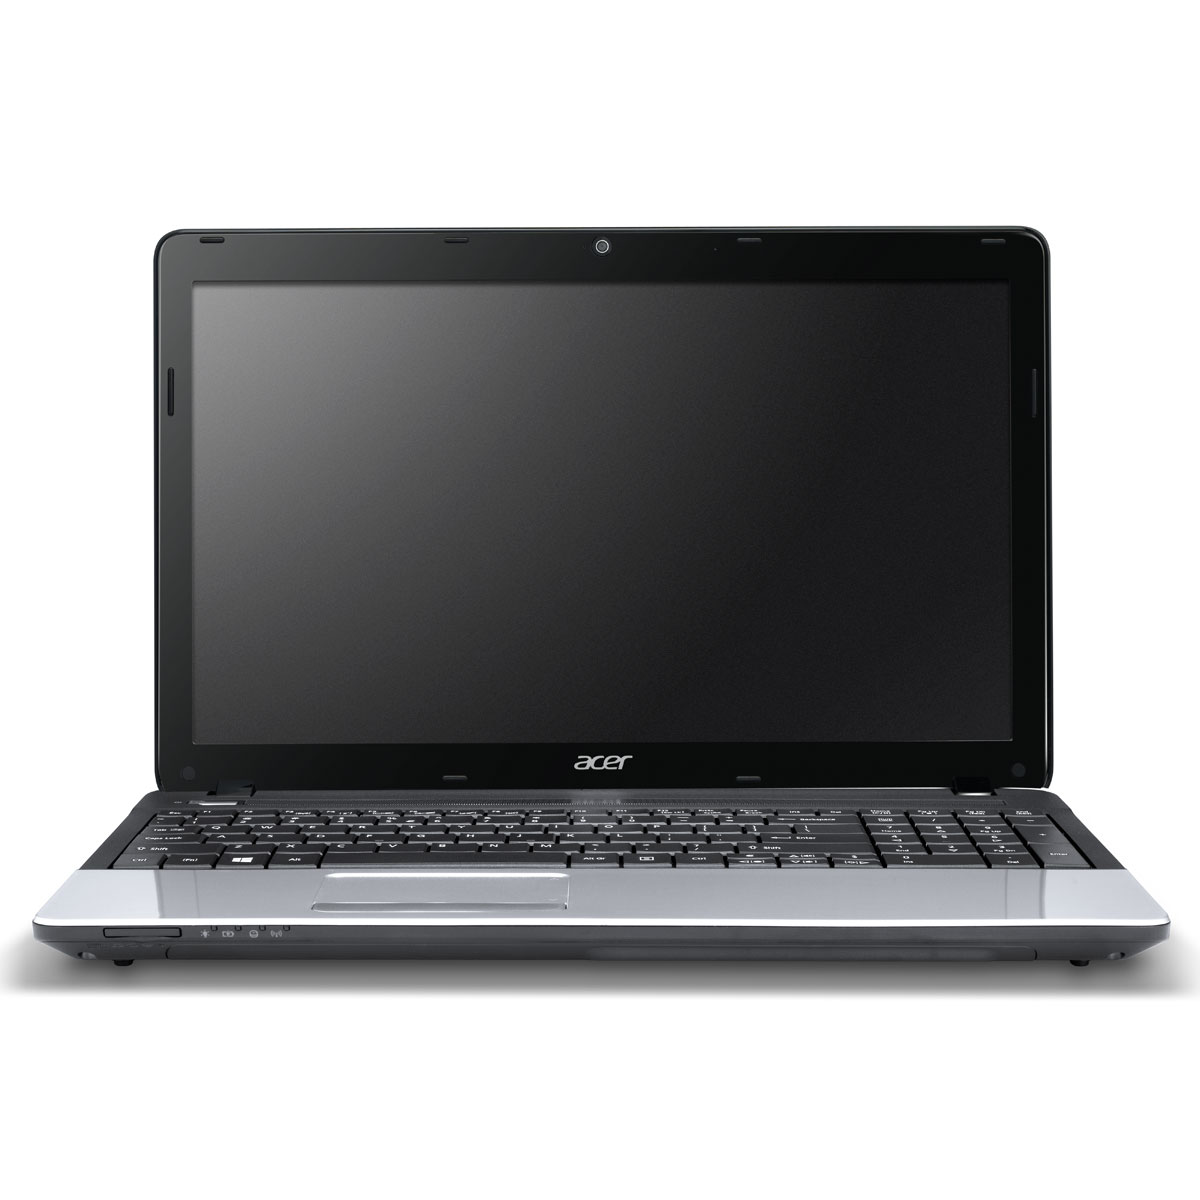 acer travel mate p253m